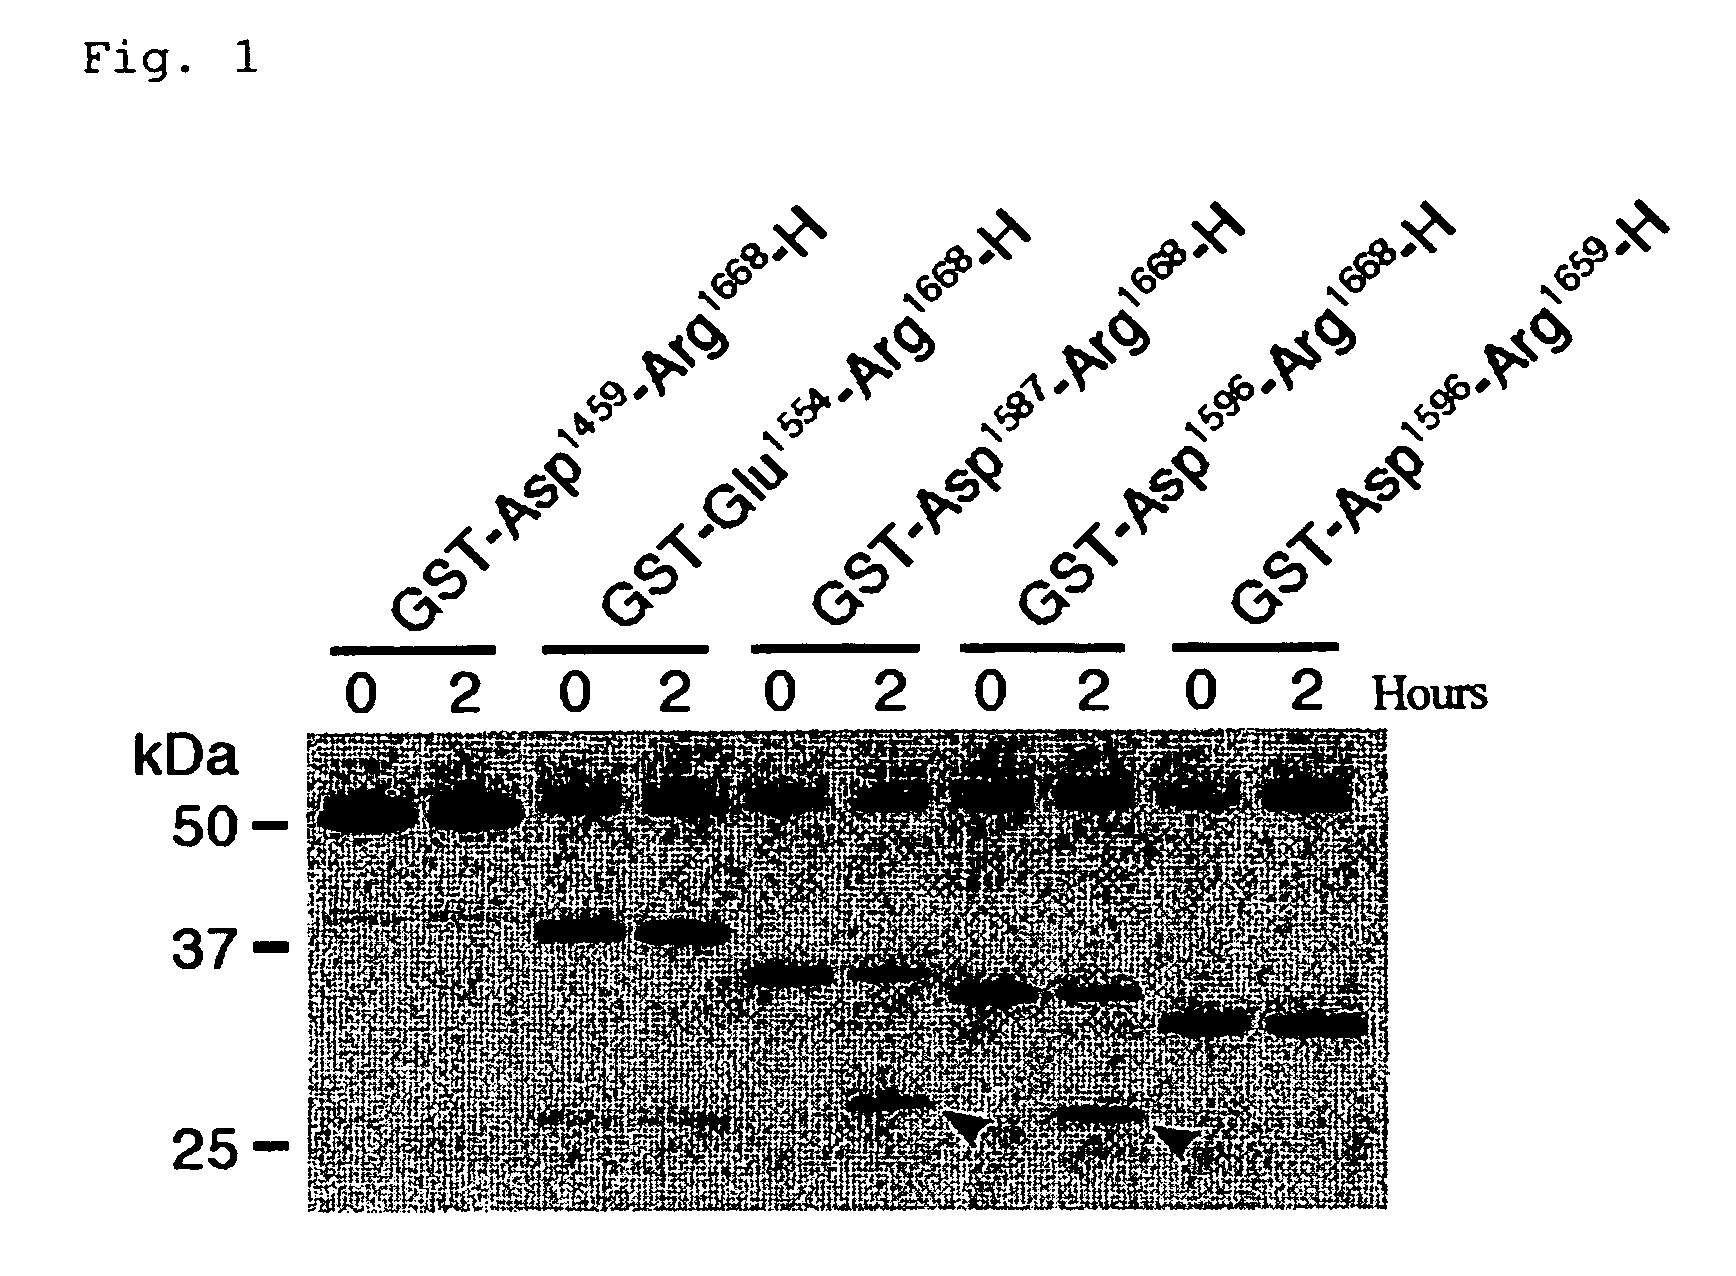 Substrates specific to von willebrand factor cleaving protease and method of assaying the activity